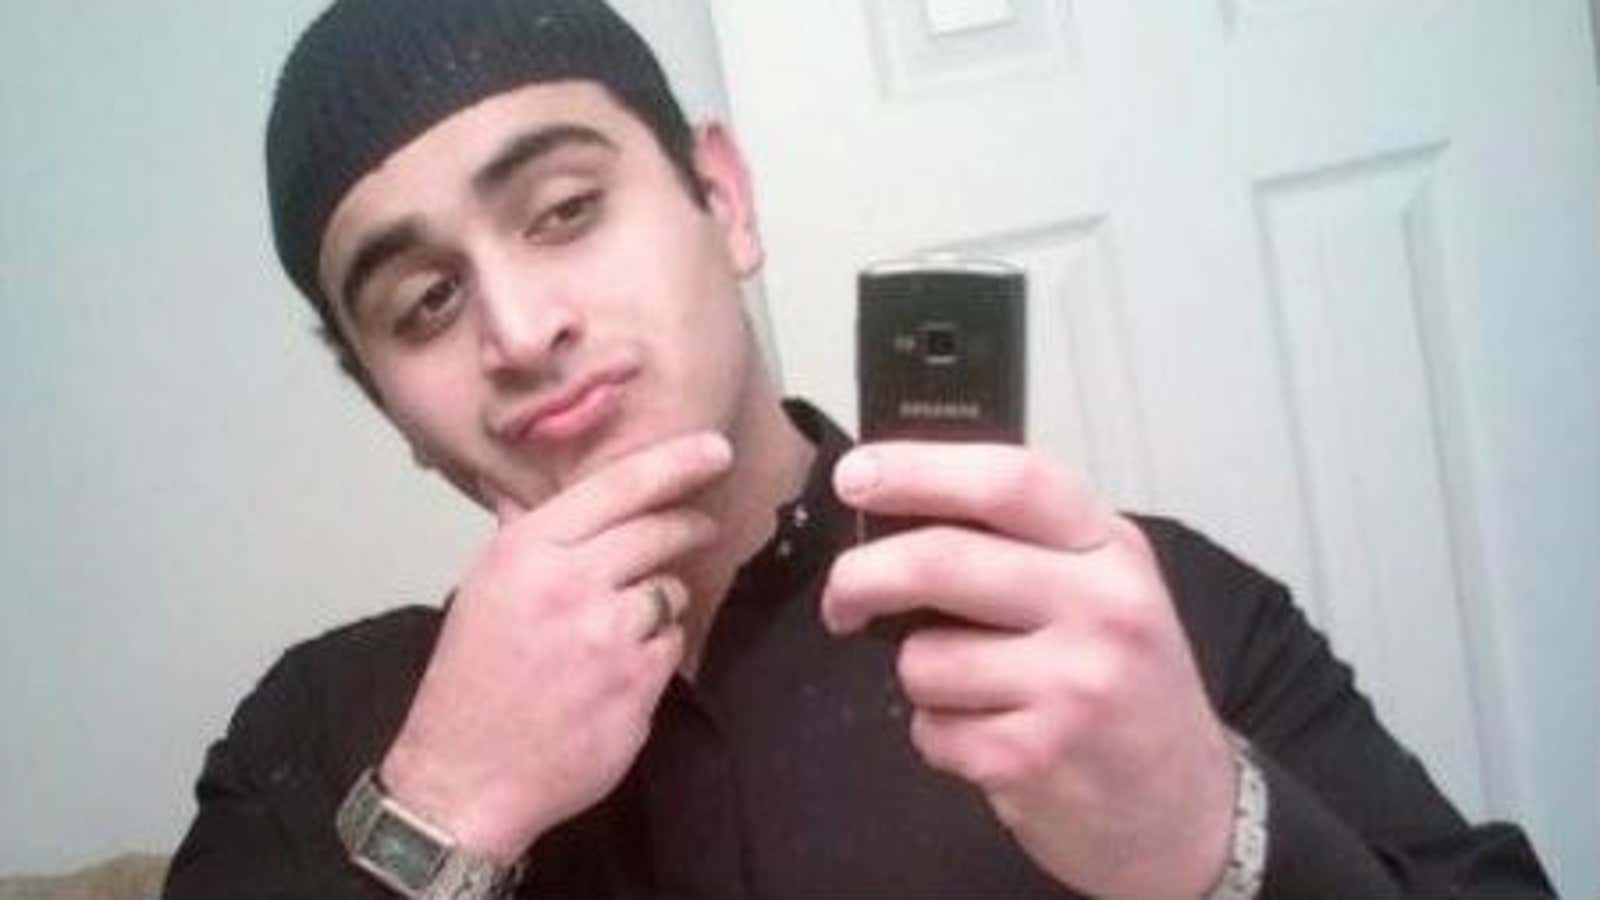 A photo of Omar Mateen from Myspace.